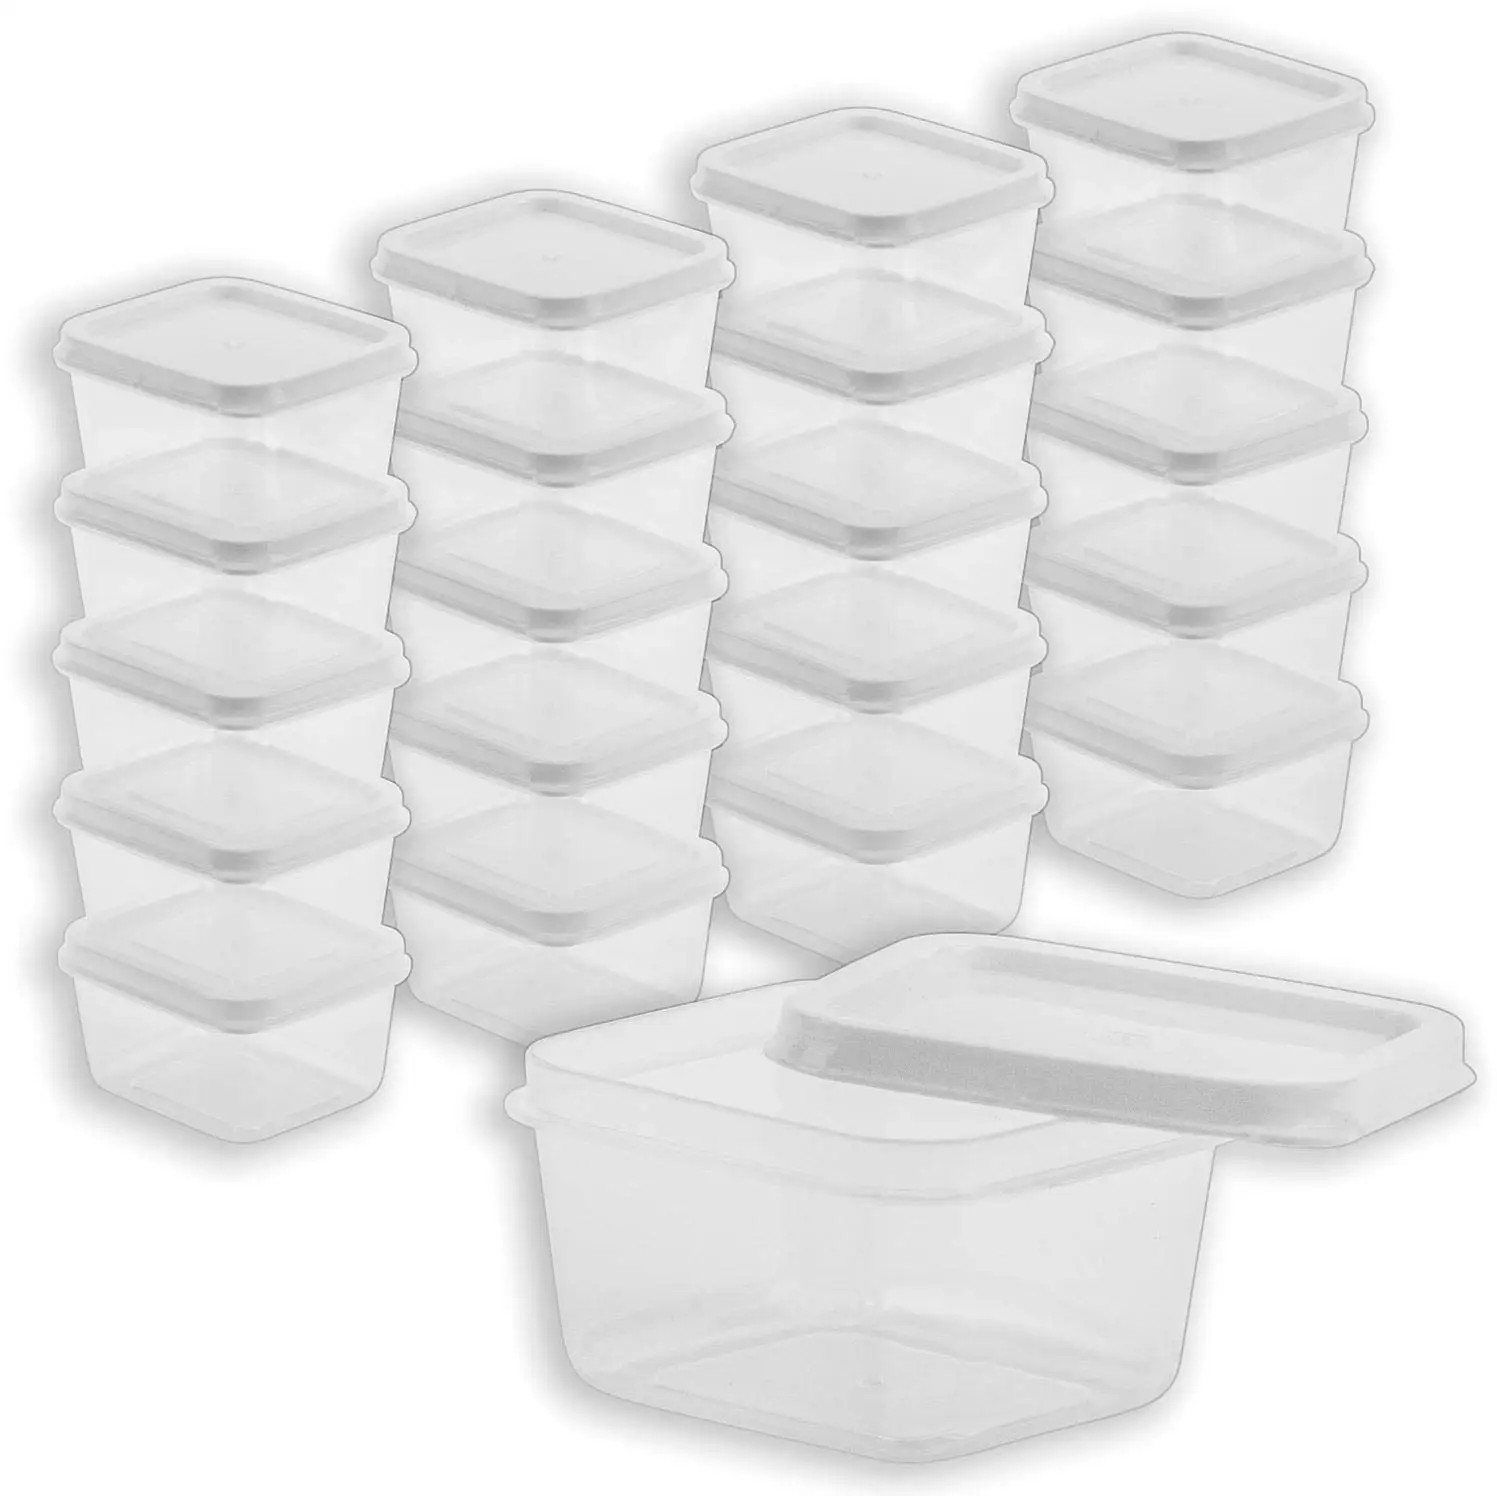 Cheap Extra Large Plastic Storage Containers With Lids, find Extra